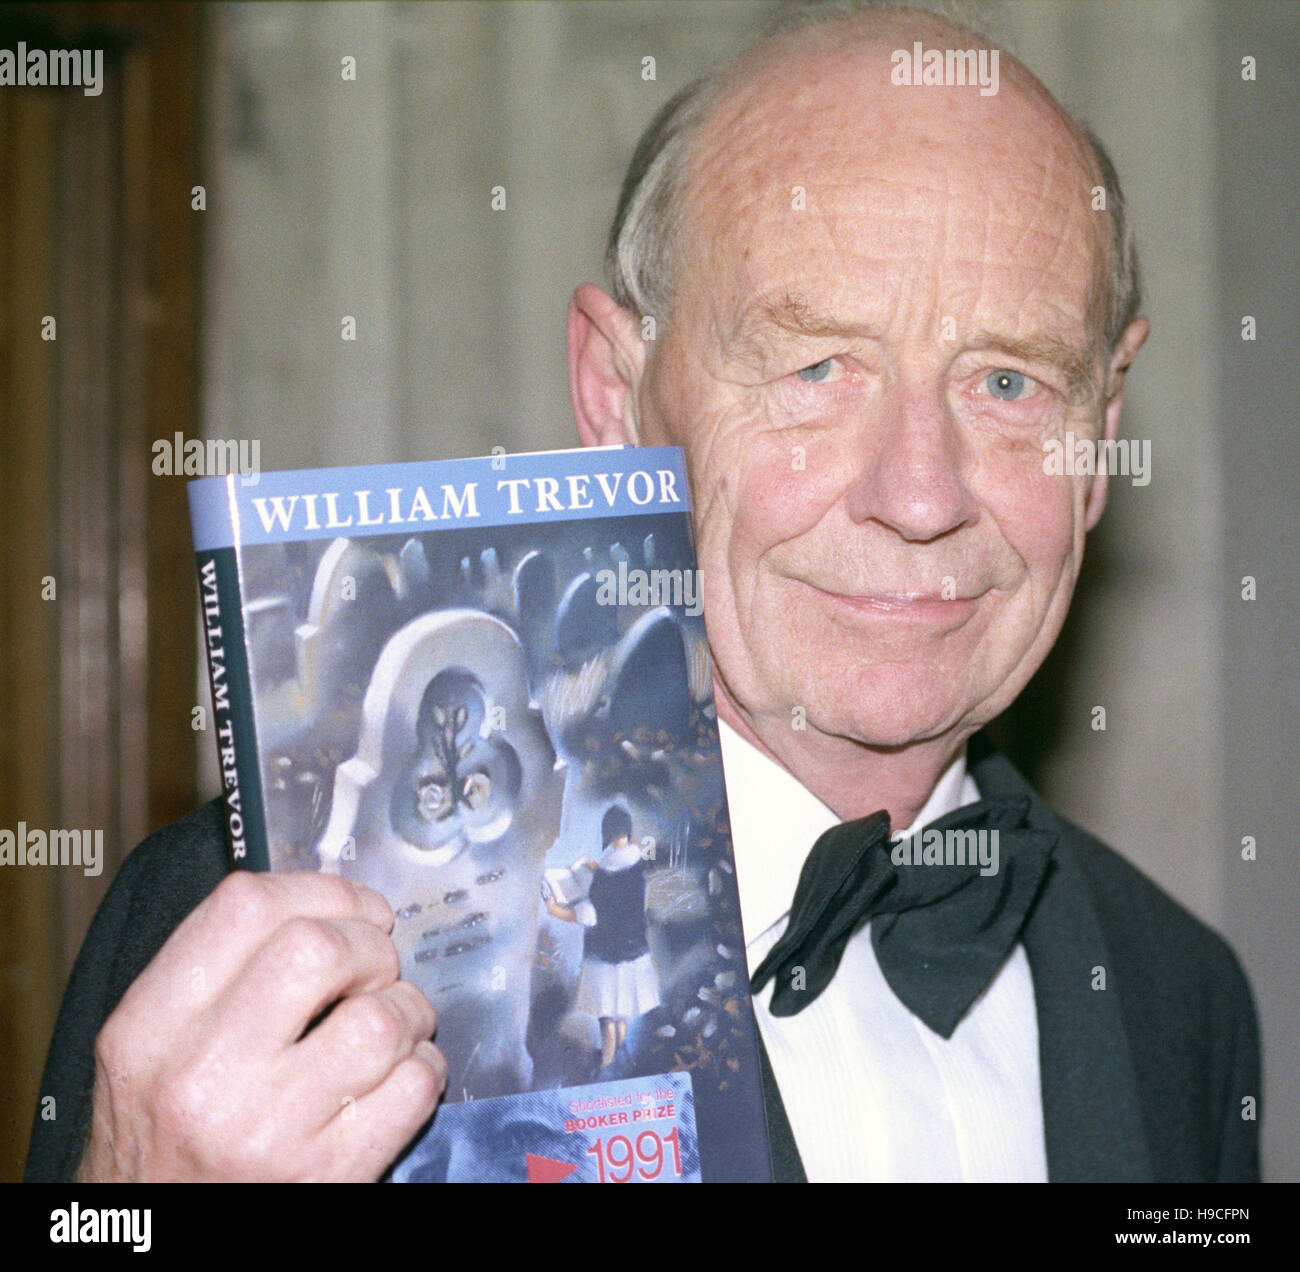 William Trevor at the Booker Prize for Fiction ceremony. Stock Photo